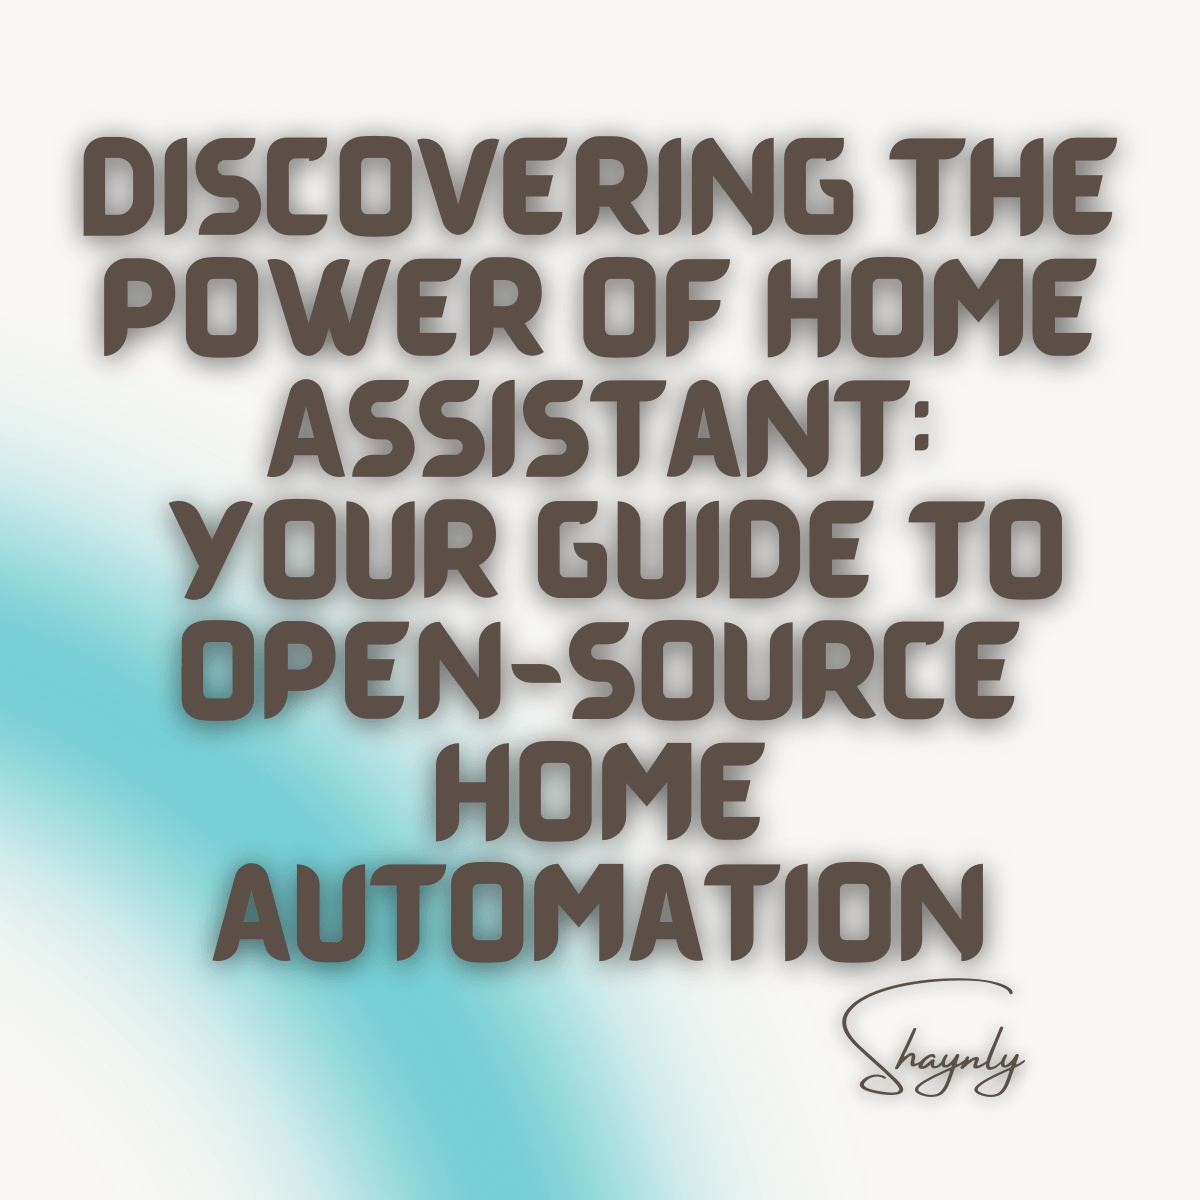 Your Guide to Open-Source Home Automation